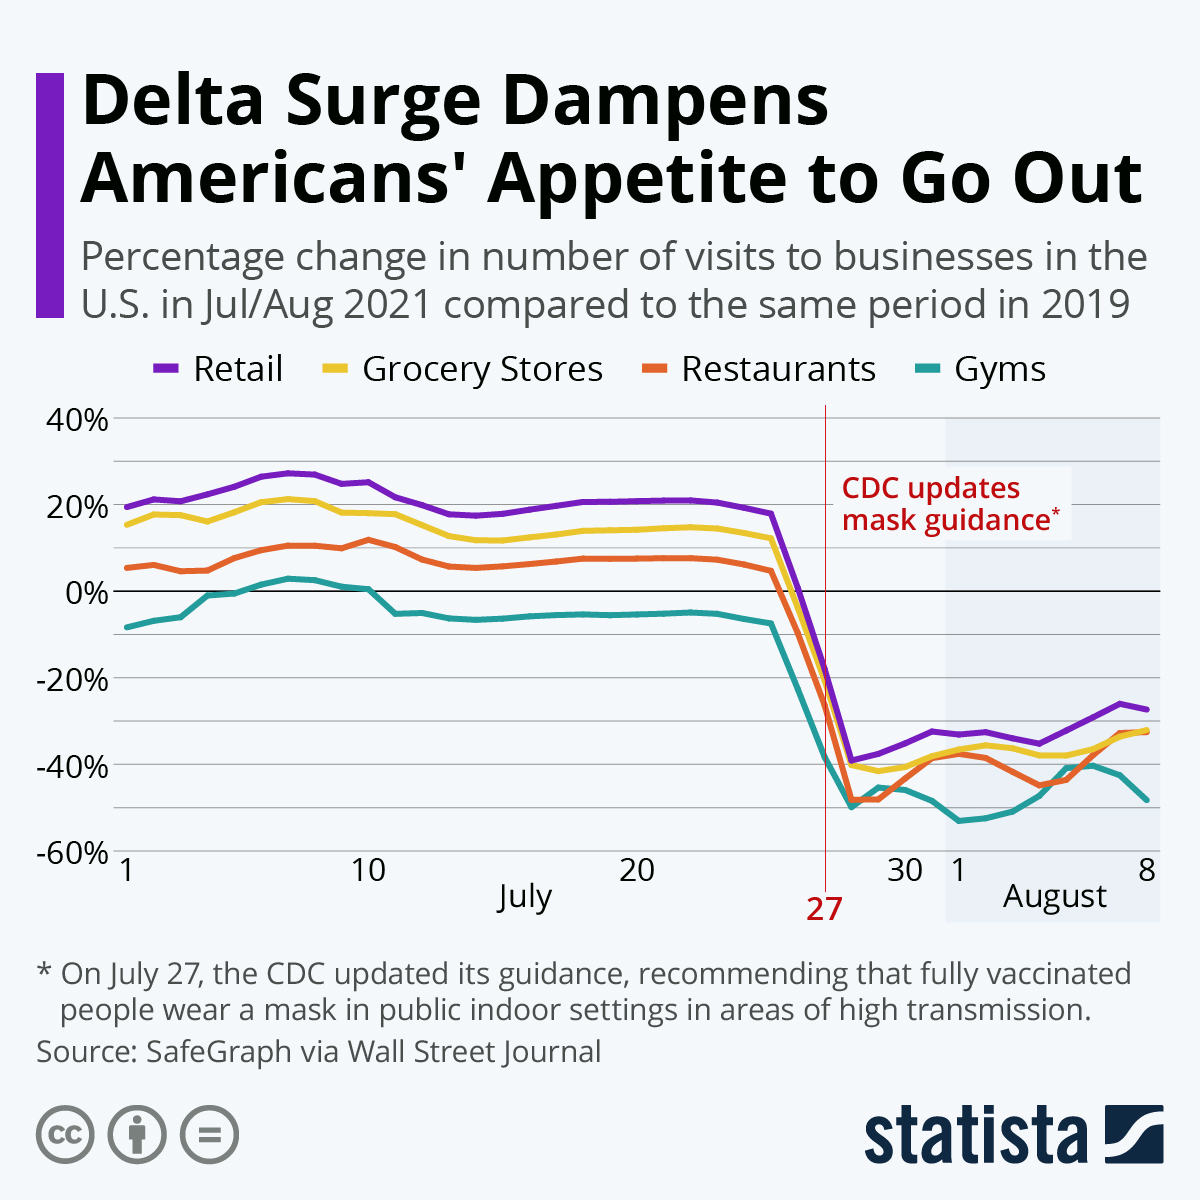 Statista: Delta Surge Dampens Americans’ Appetite to Go Out